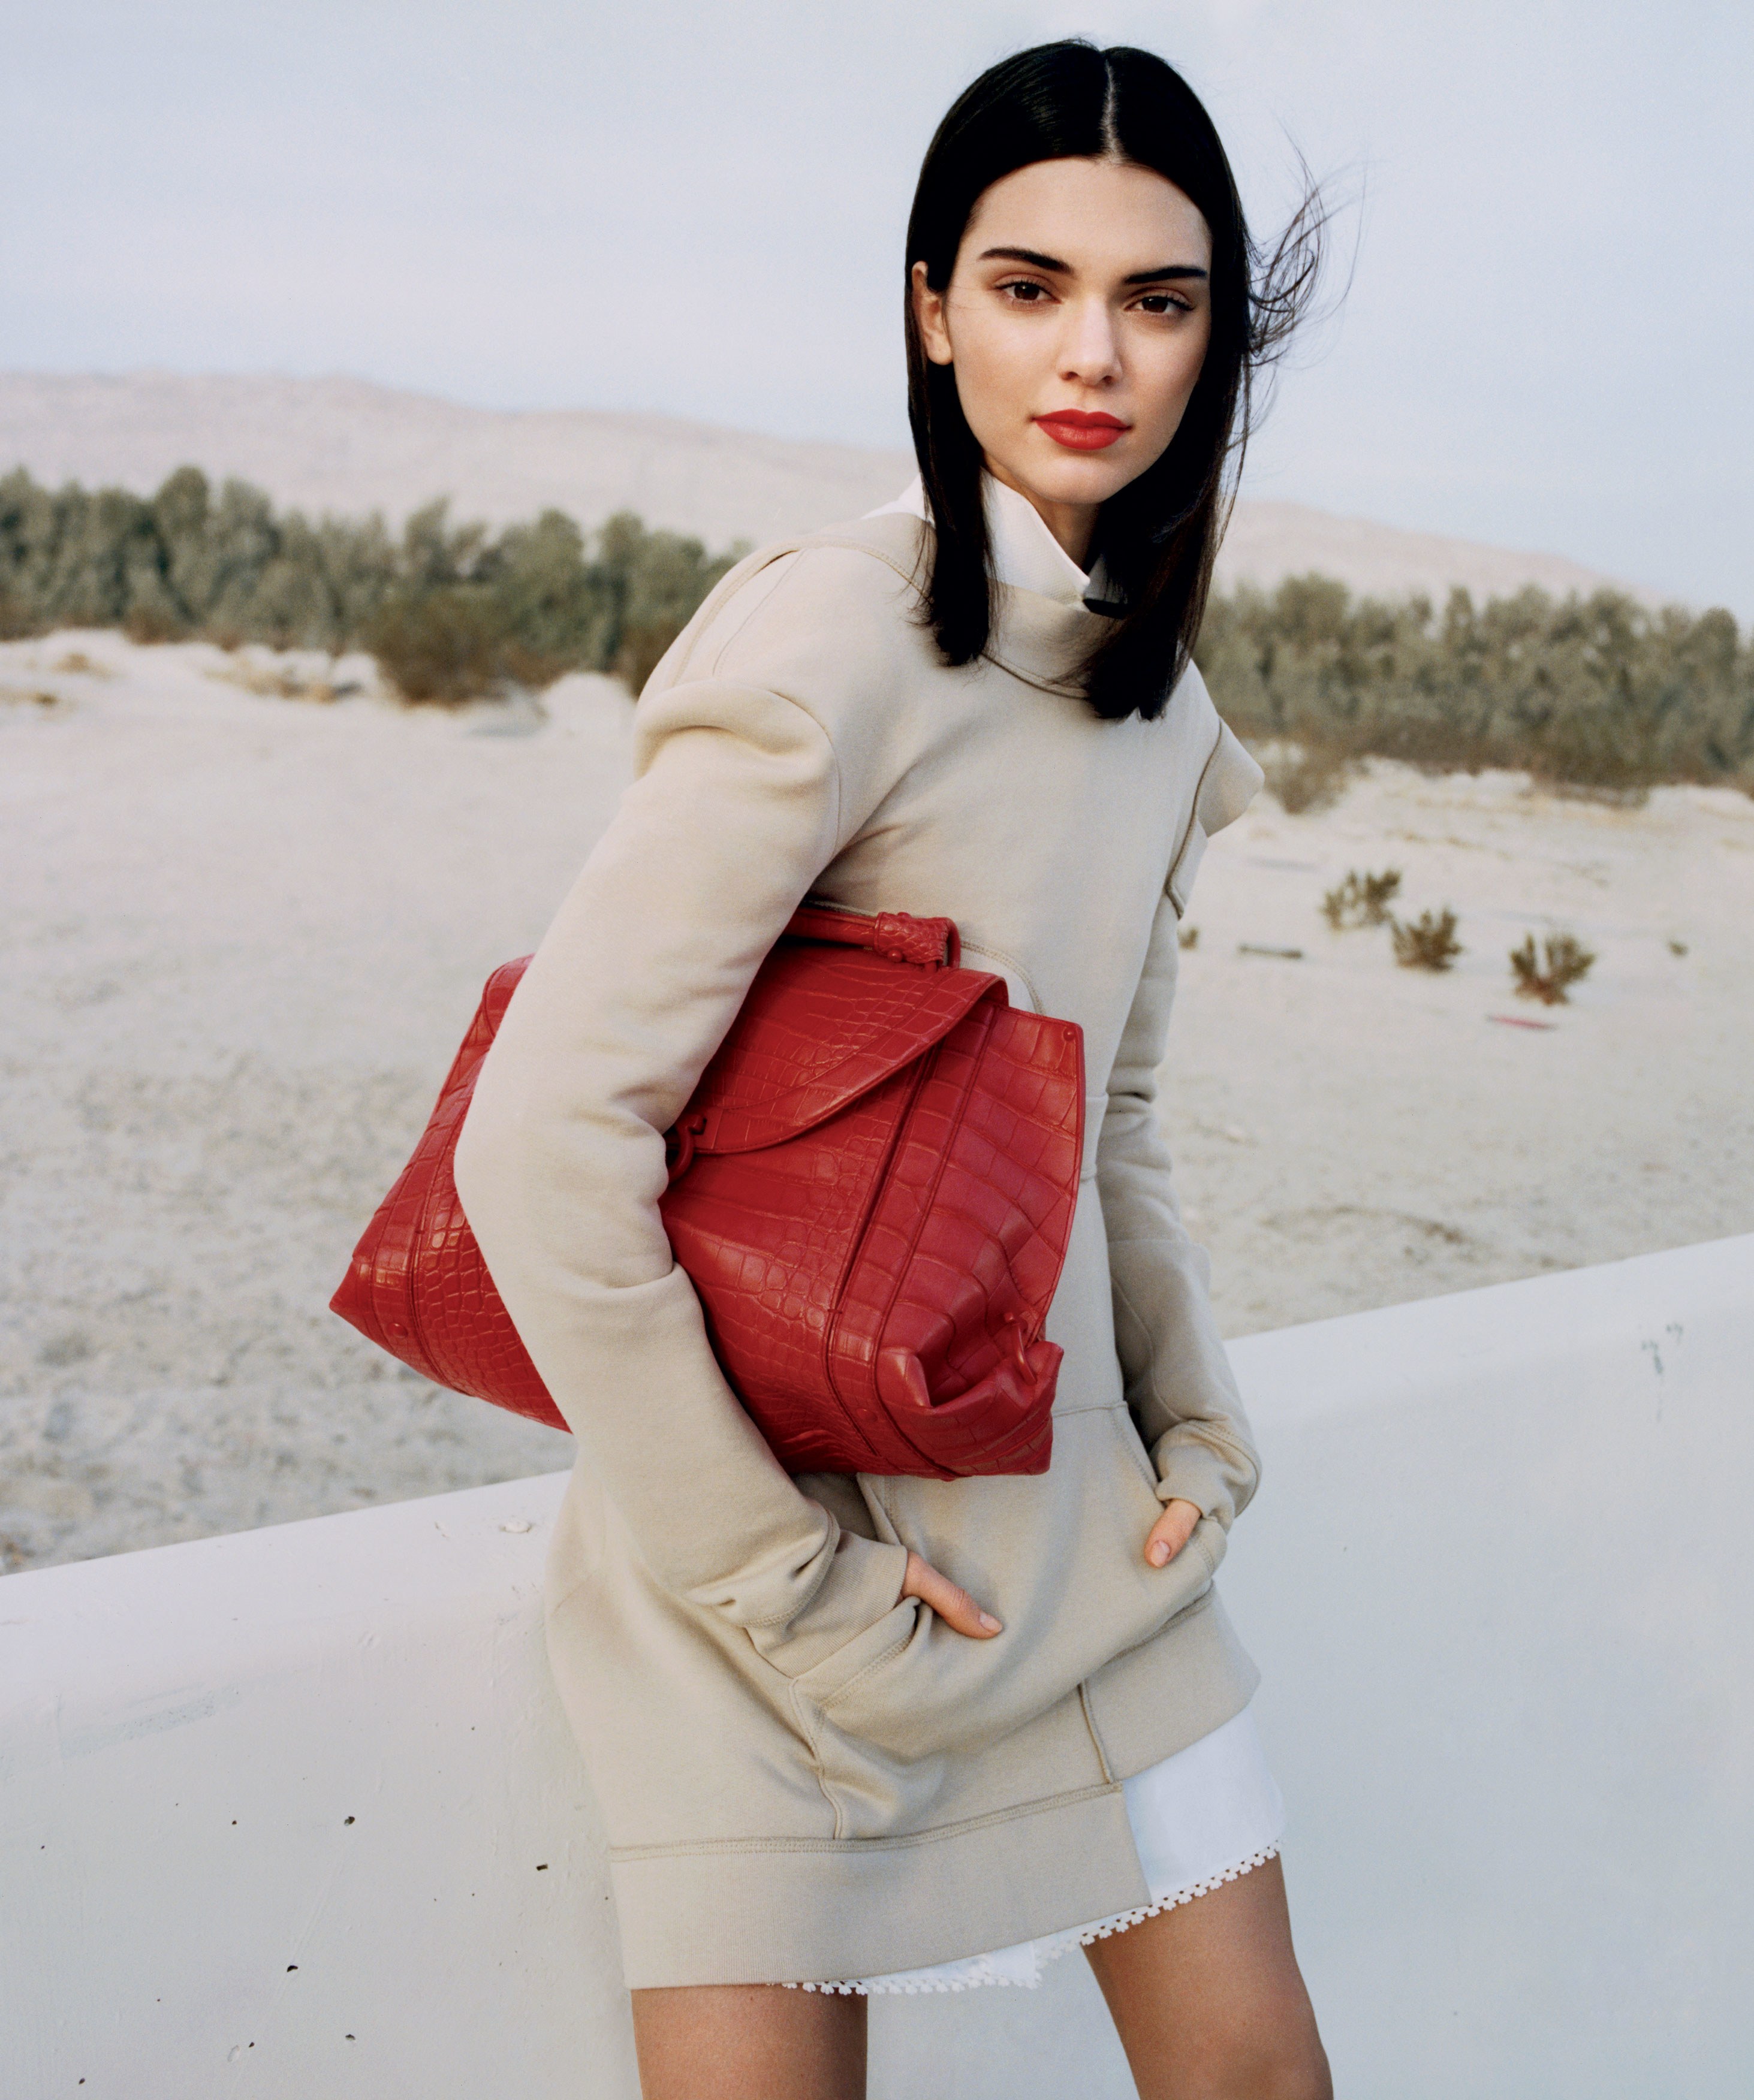 Kendall and Kylie Jenner Launch Handbag Collection